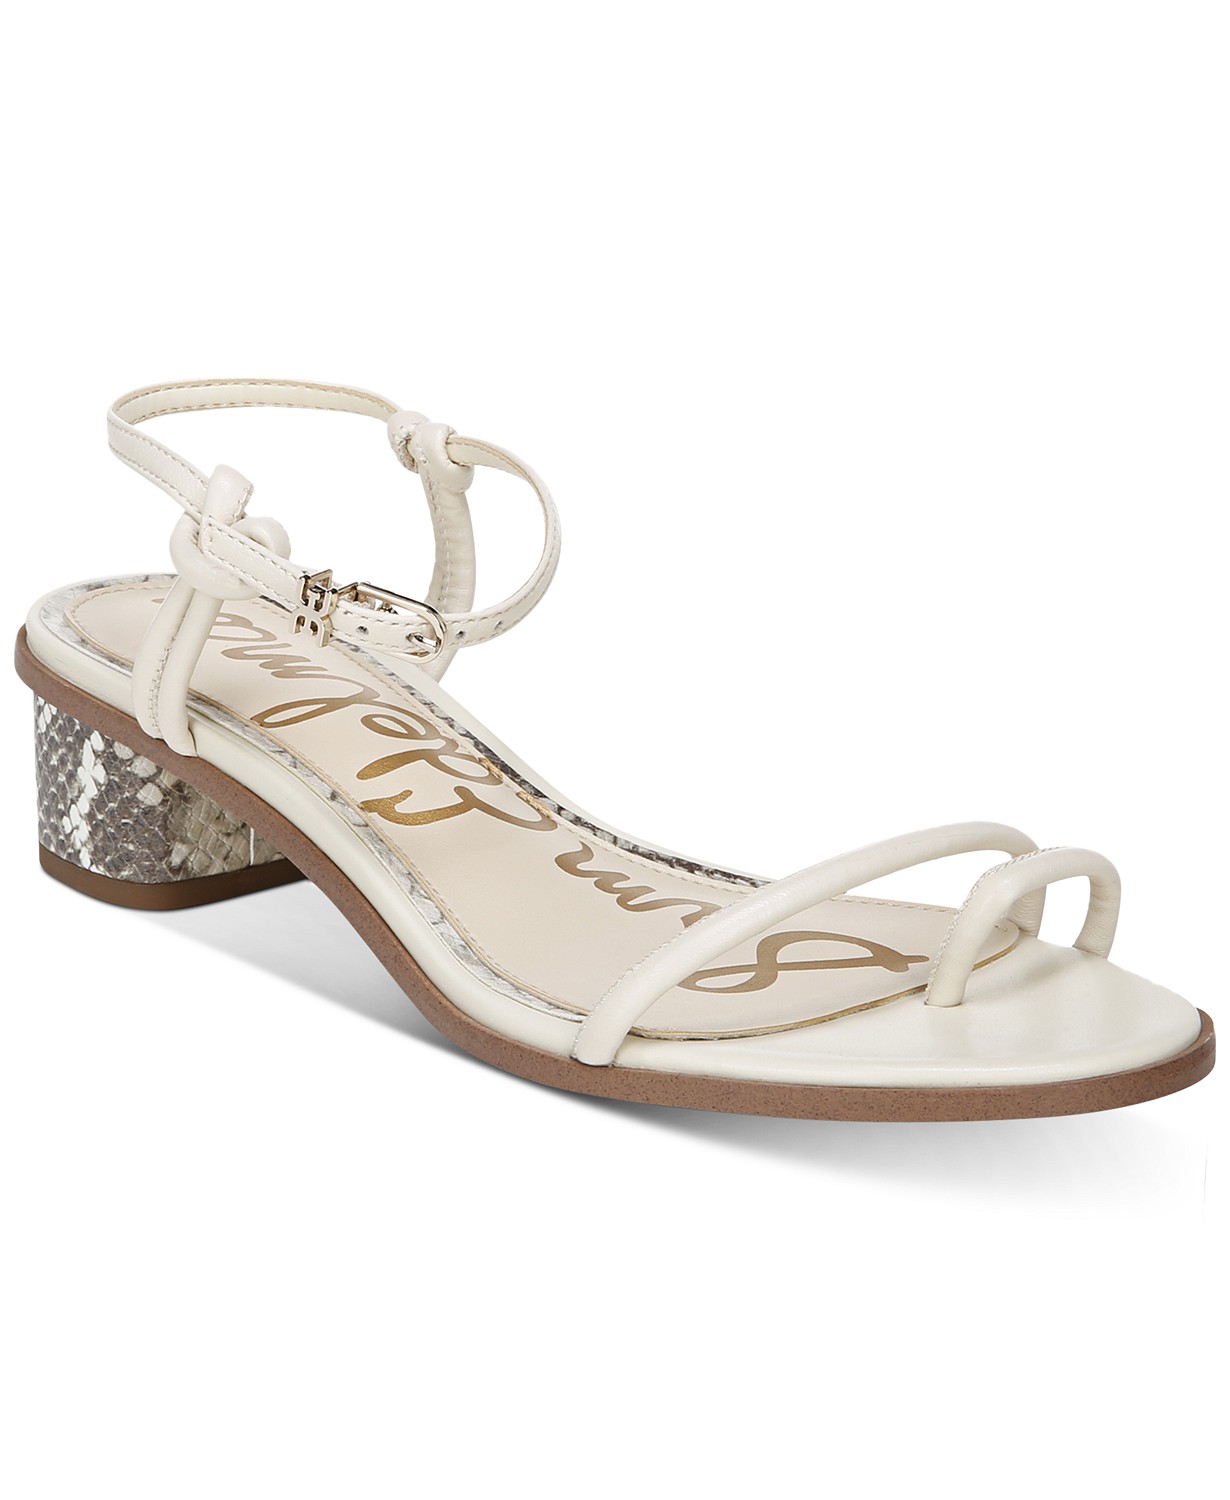 www.couturepoint.com-sam-edelman-womens-ivory-leather-isle-strappy-sandals